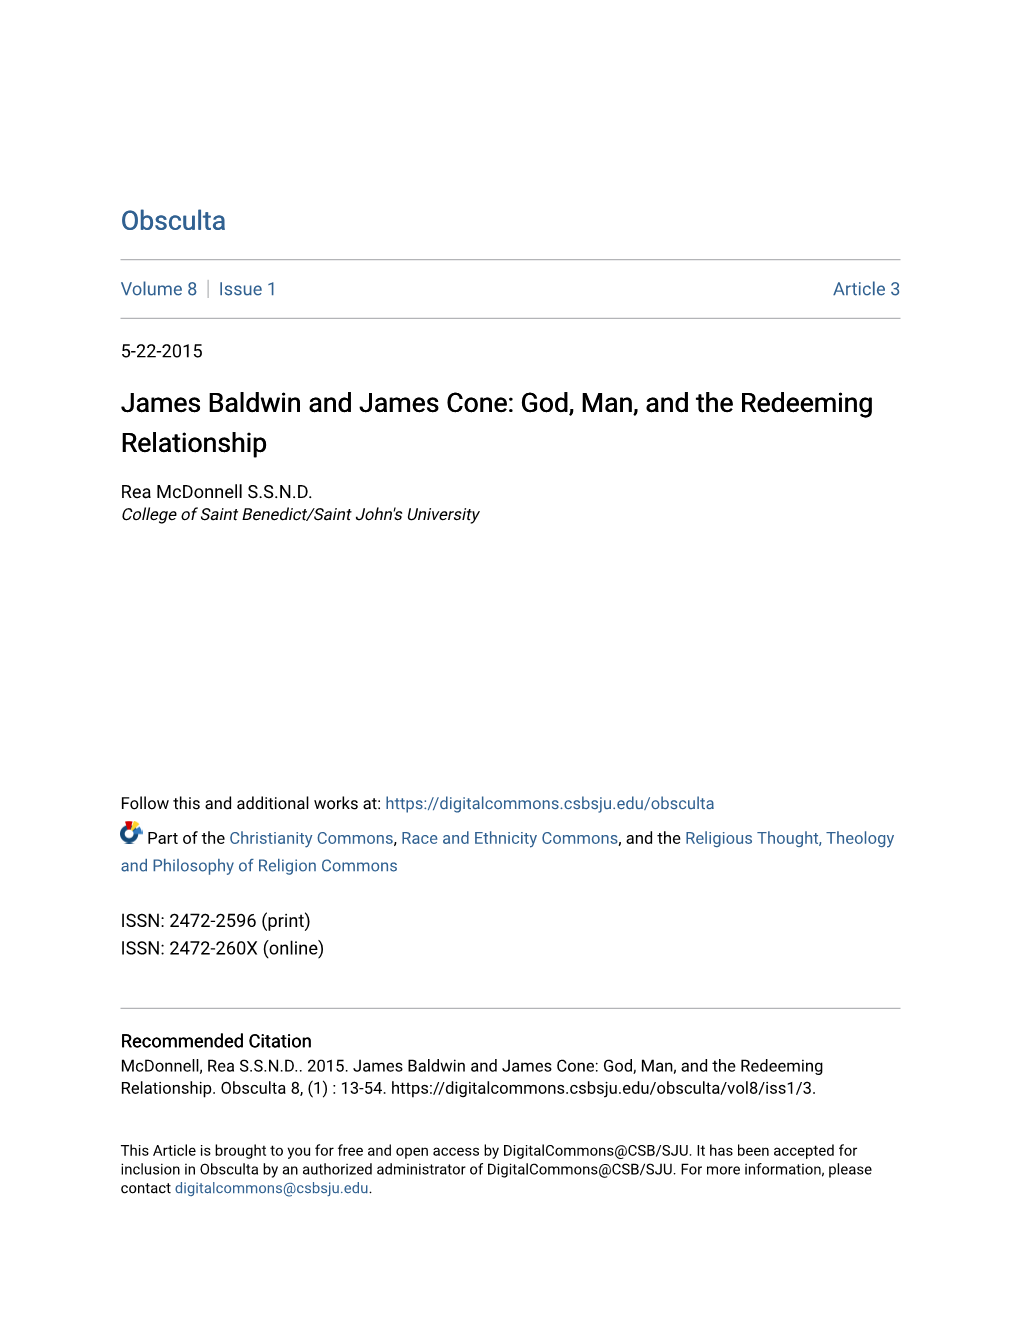 James Baldwin and James Cone: God, Man, and the Redeeming Relationship